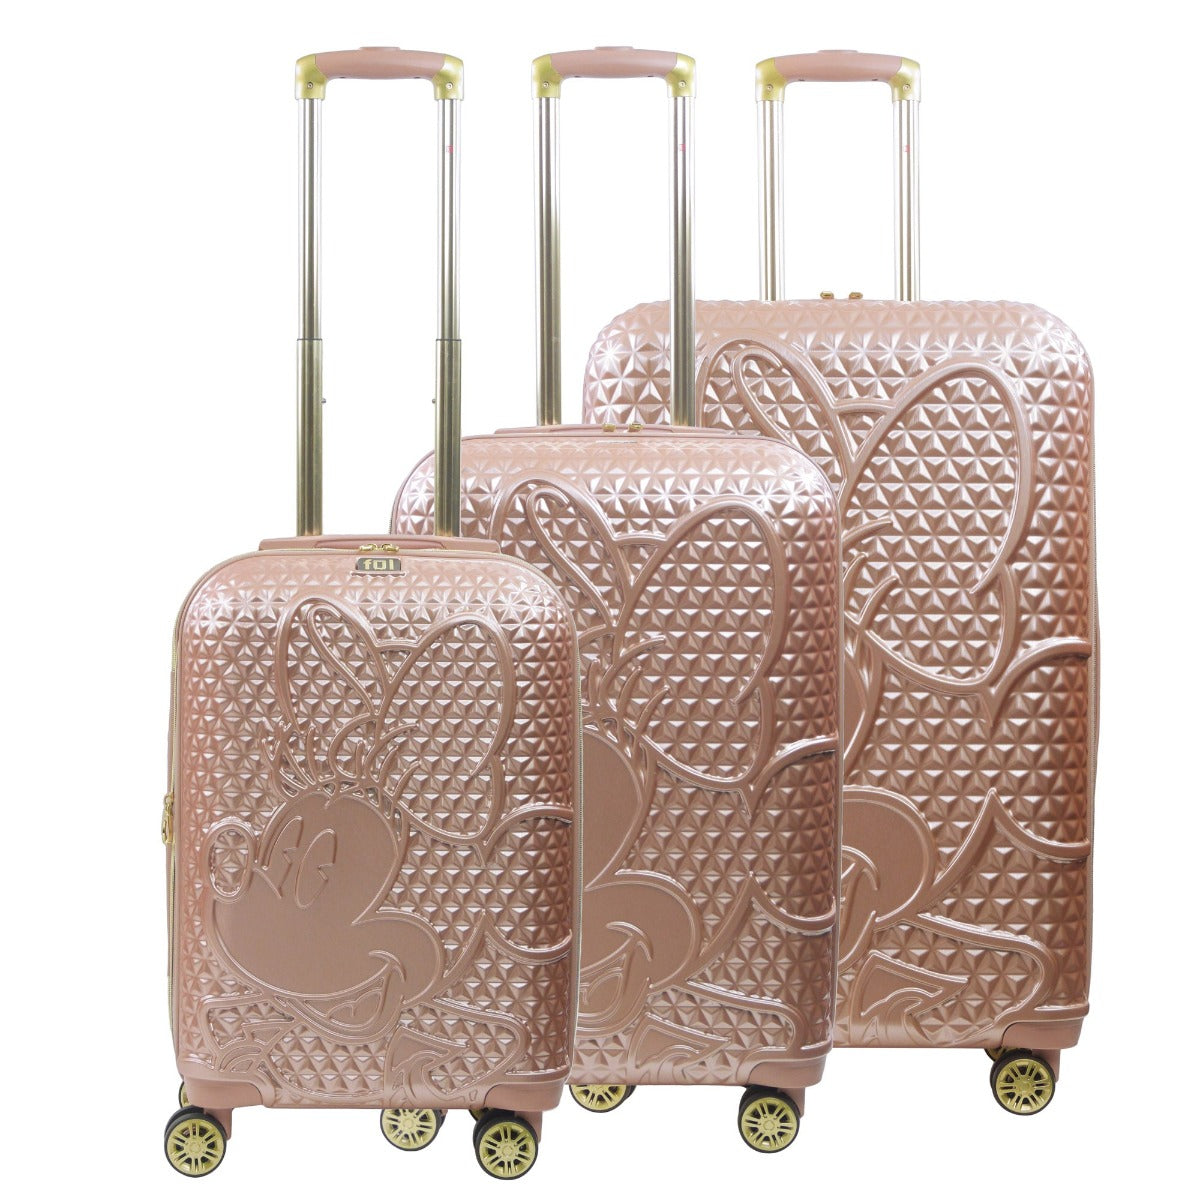 Ful Disney Minnie Mouse rolling luggage 3 piece set rose gold - best suitcases for traveling